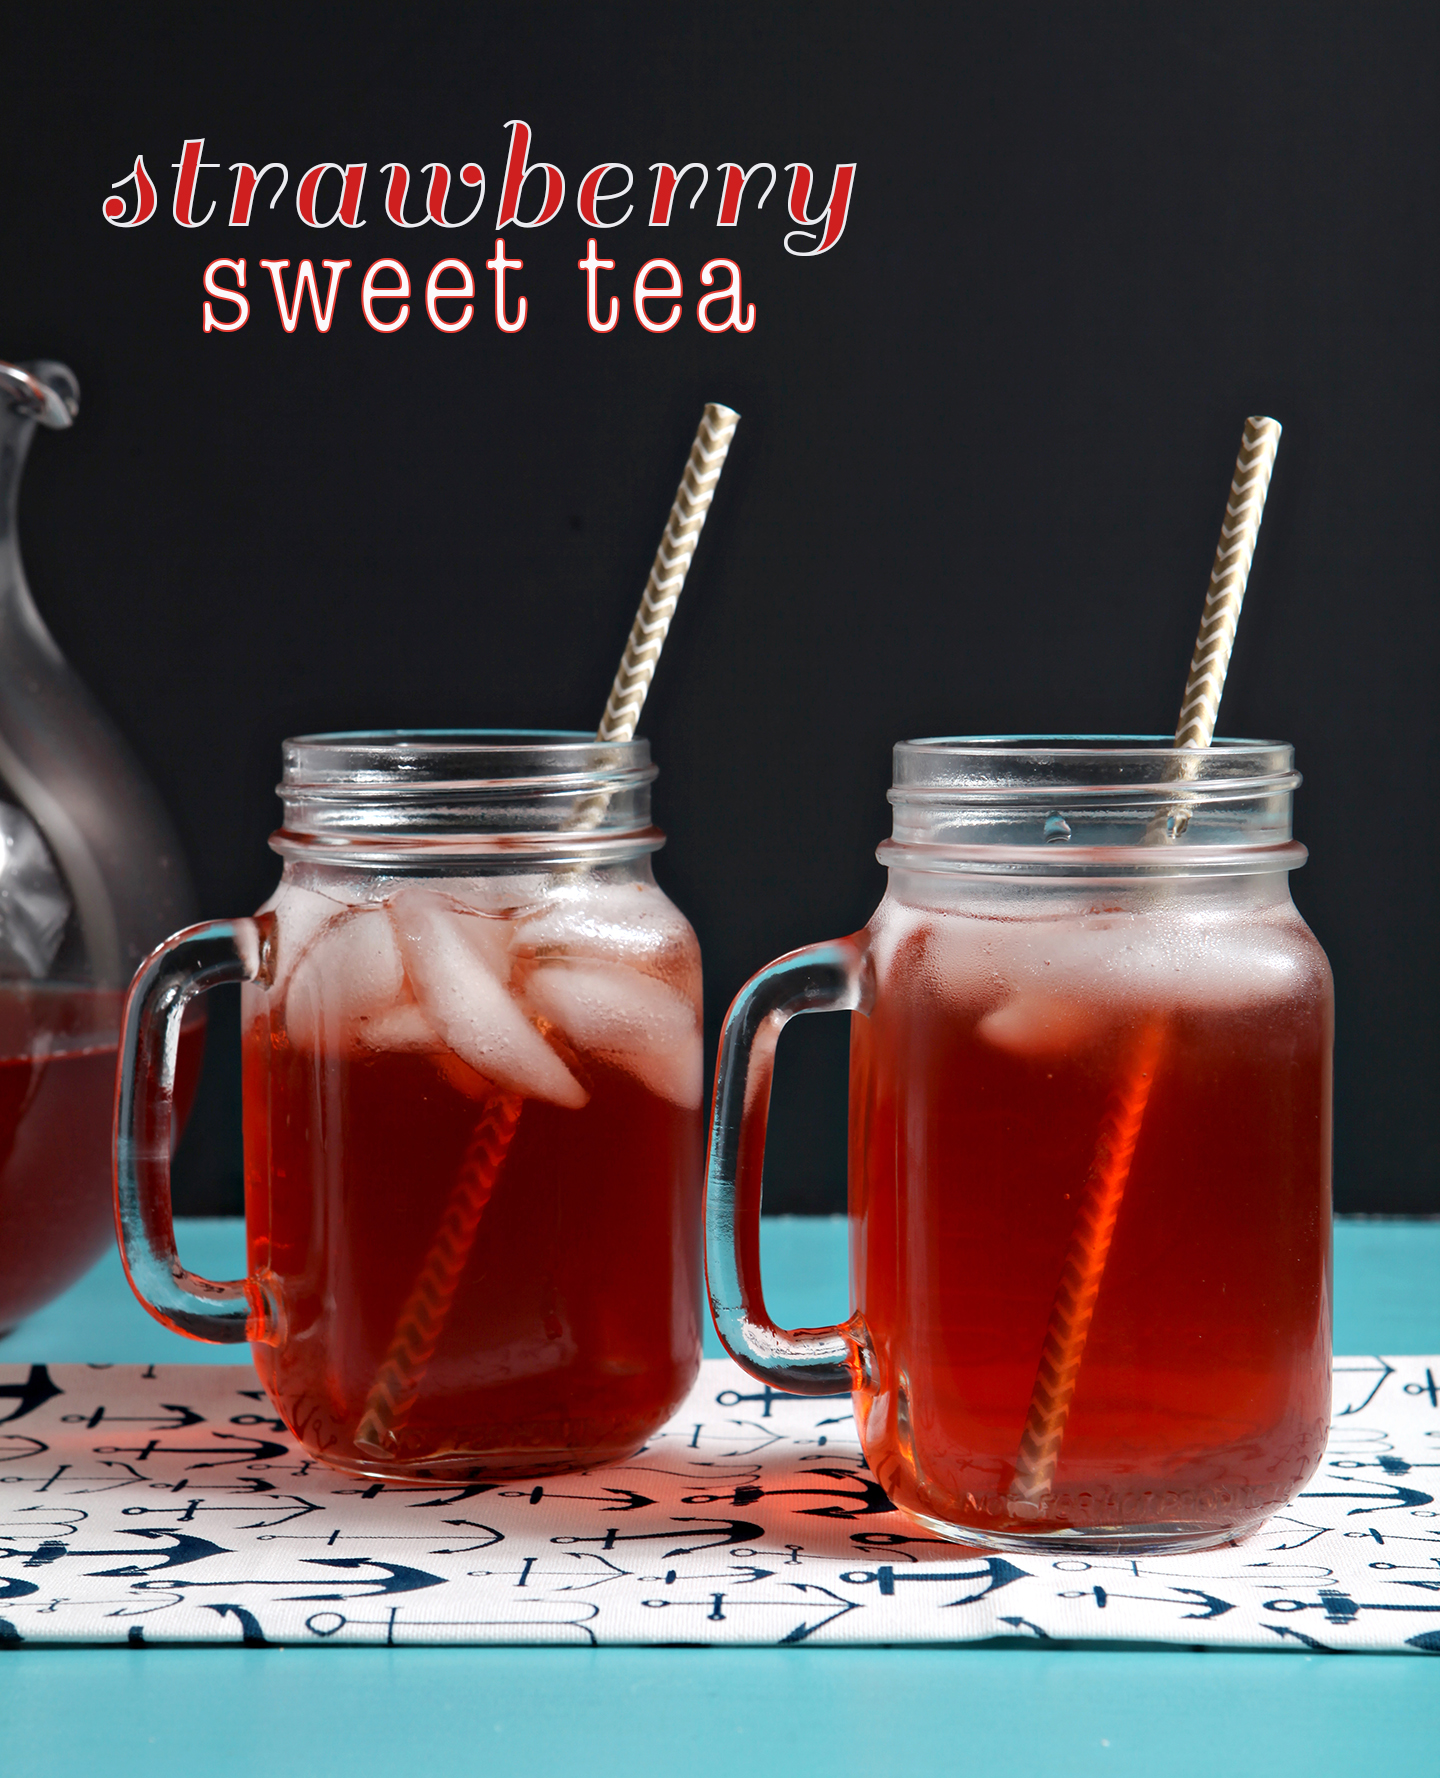 Strawberry Sweet Tea | Stay cool during the dog days of summer with this refreshing Strawberry Sweet Tea! Singing of strawberries and summertime sweetness, this tea is perfect to sip during a warm afternoon.